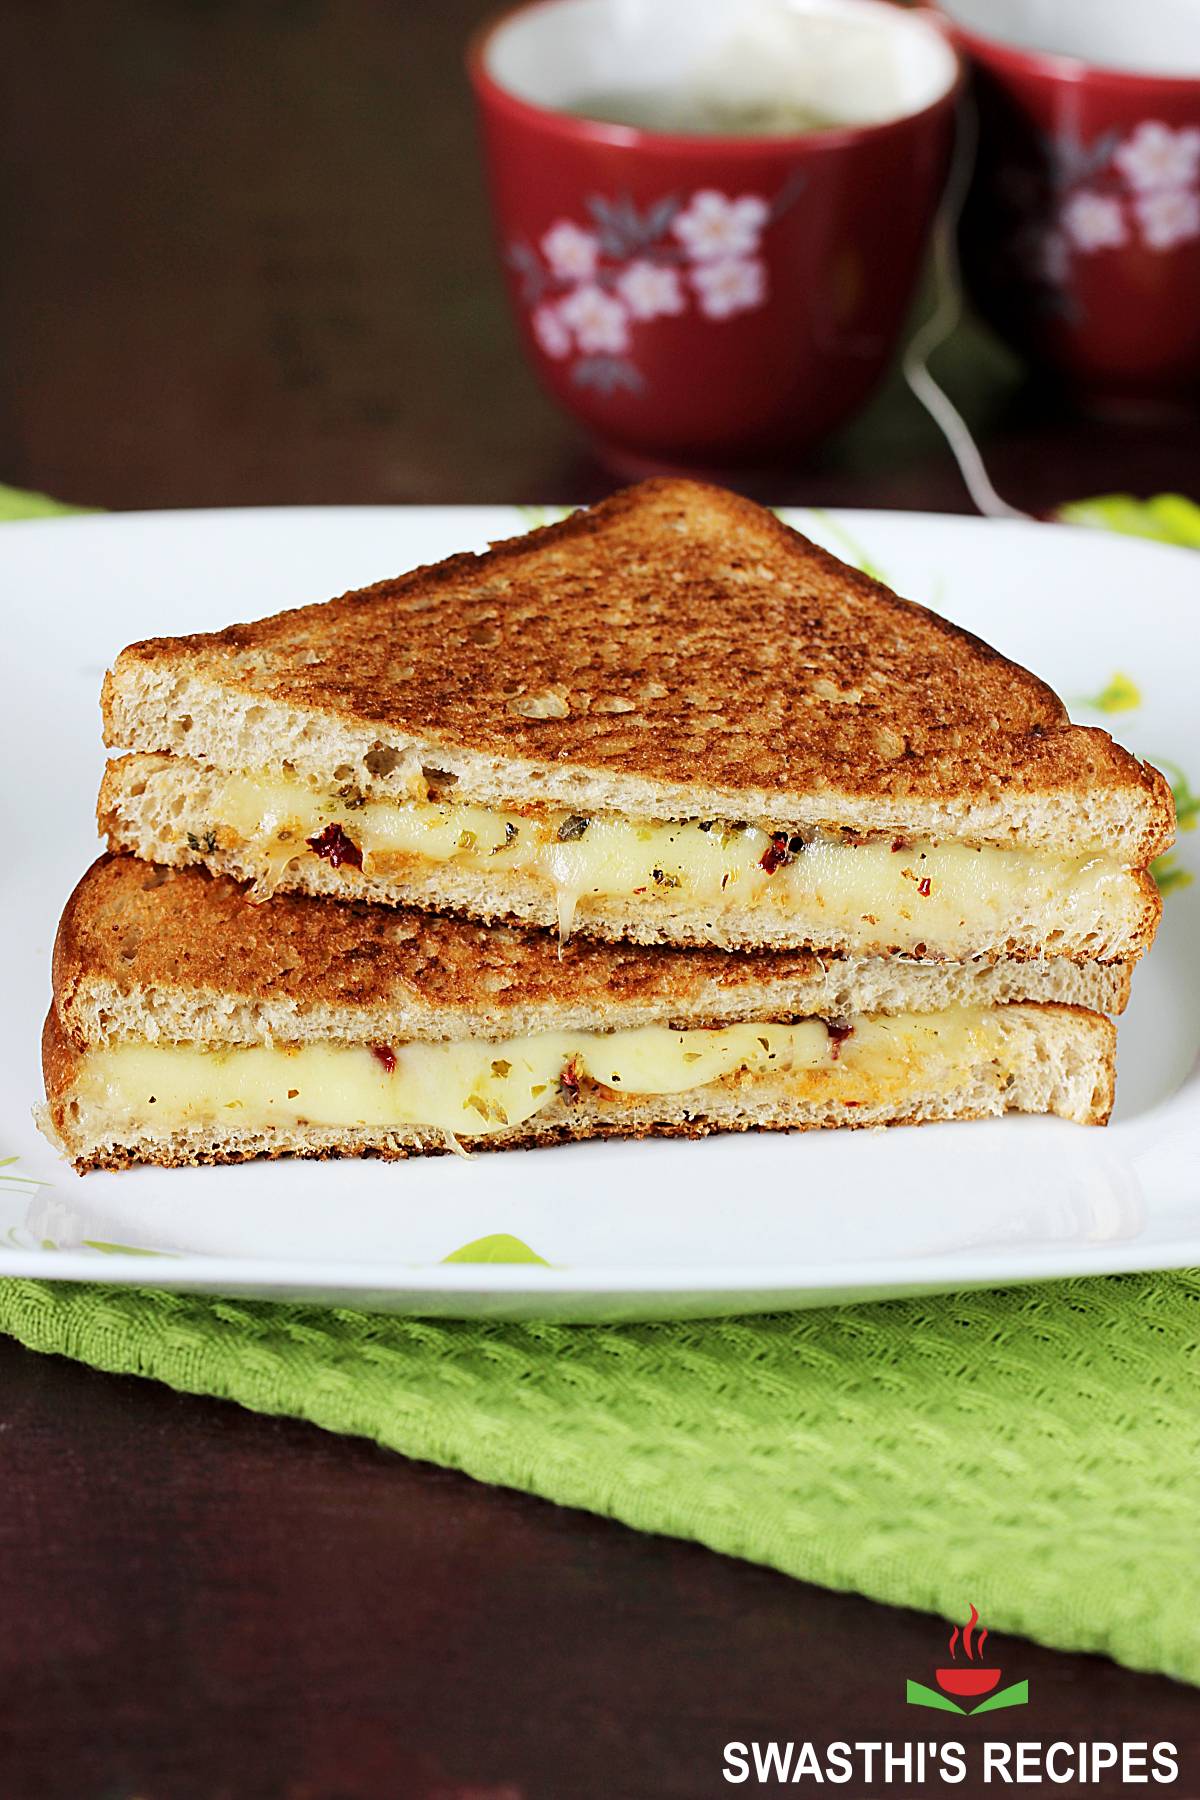 Grilled Cheese Sandwich Recipe (3 Tips, with Photos)